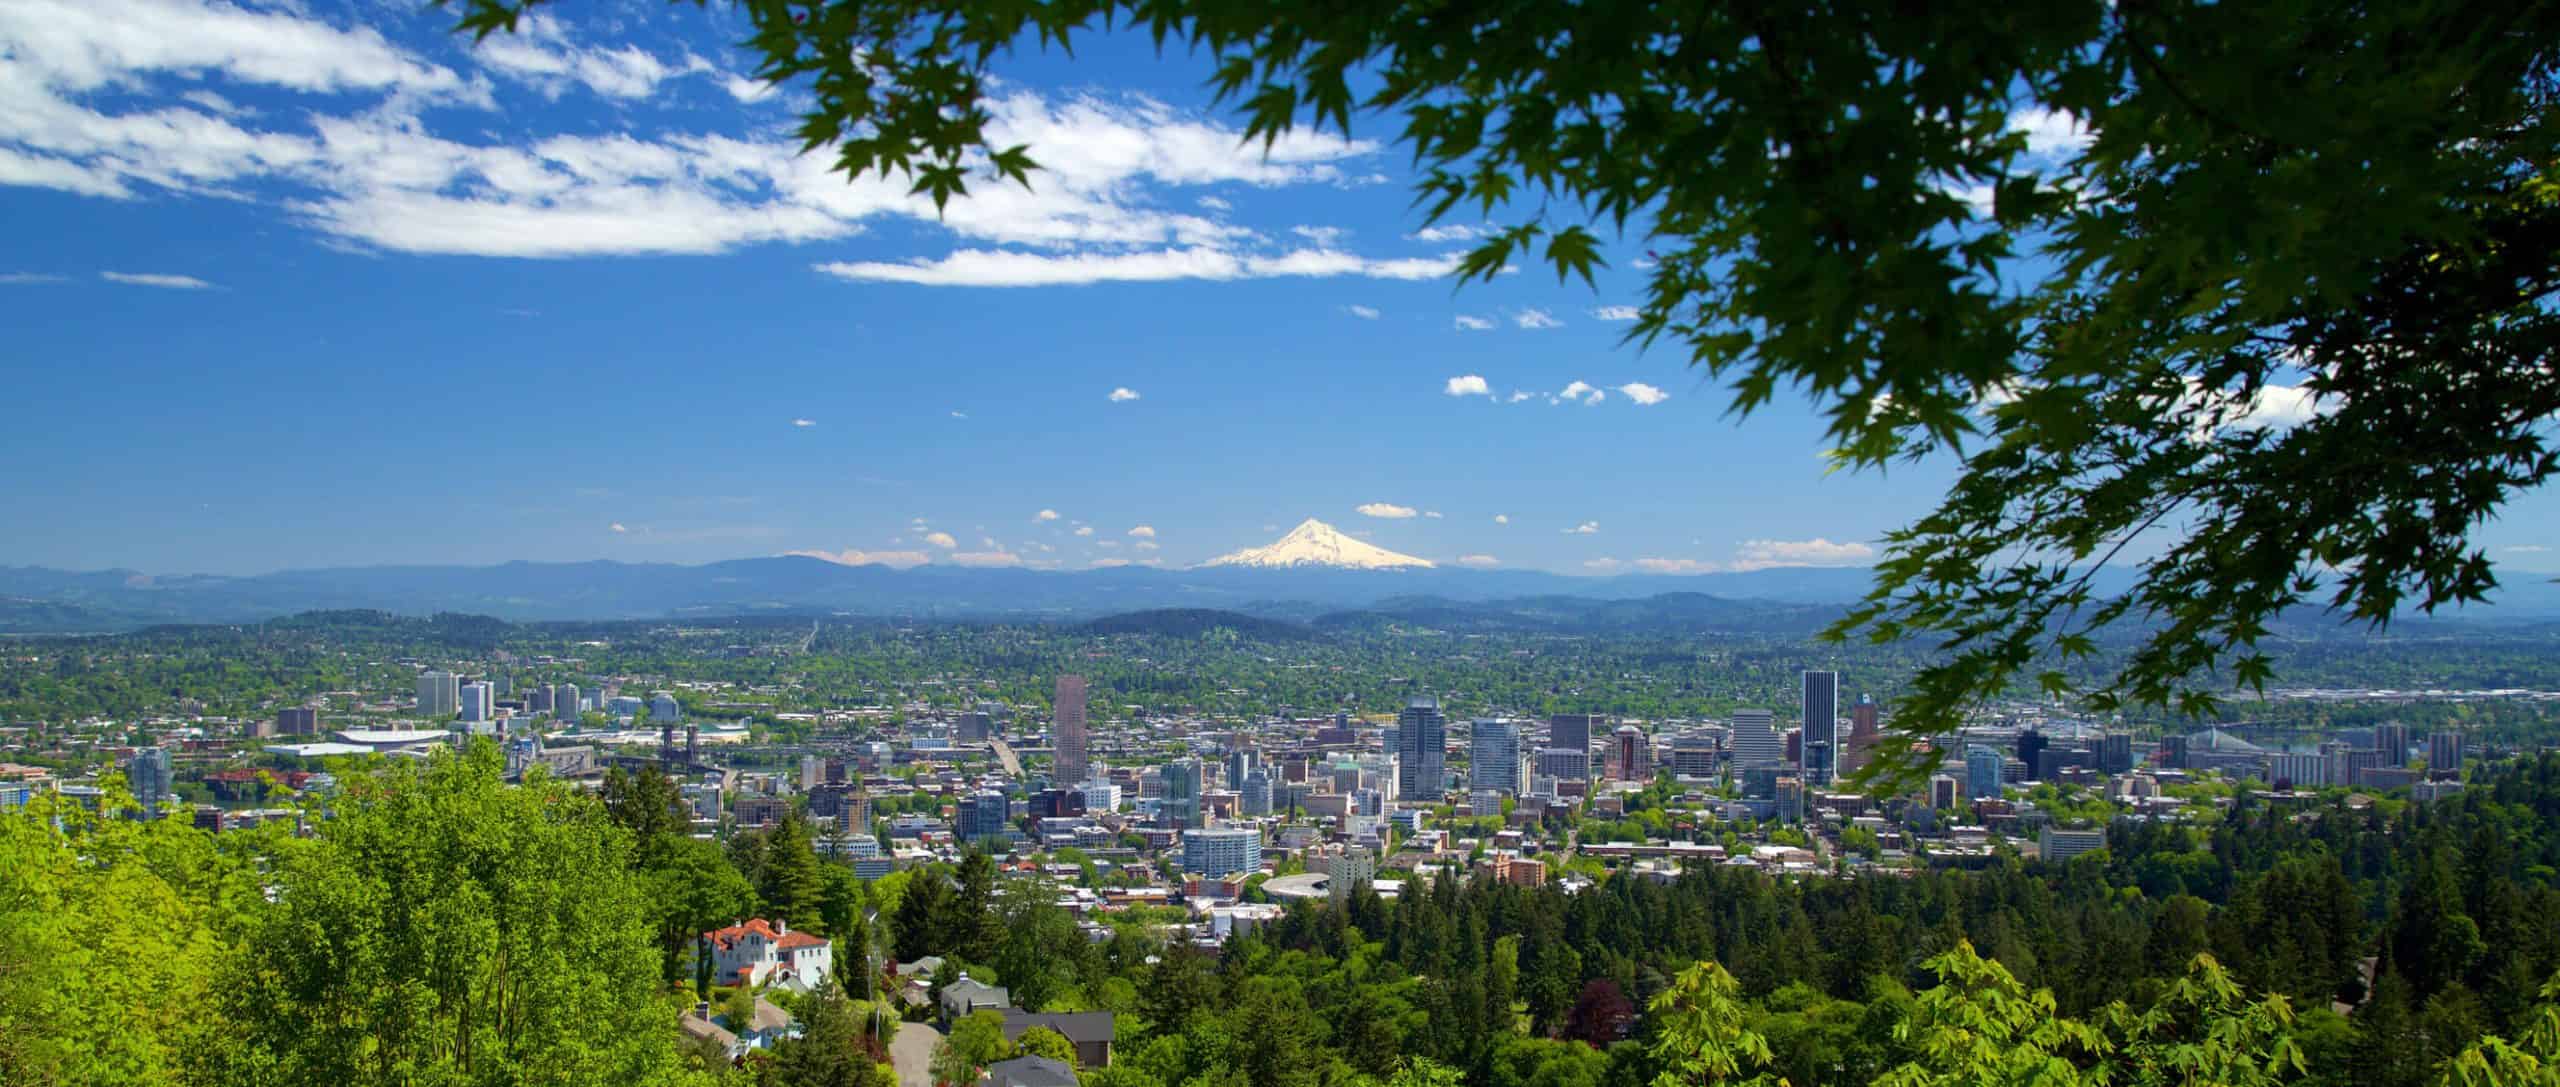 View of Portland, OR and Mt. Hood slightly obscured by tree in top-right foreground